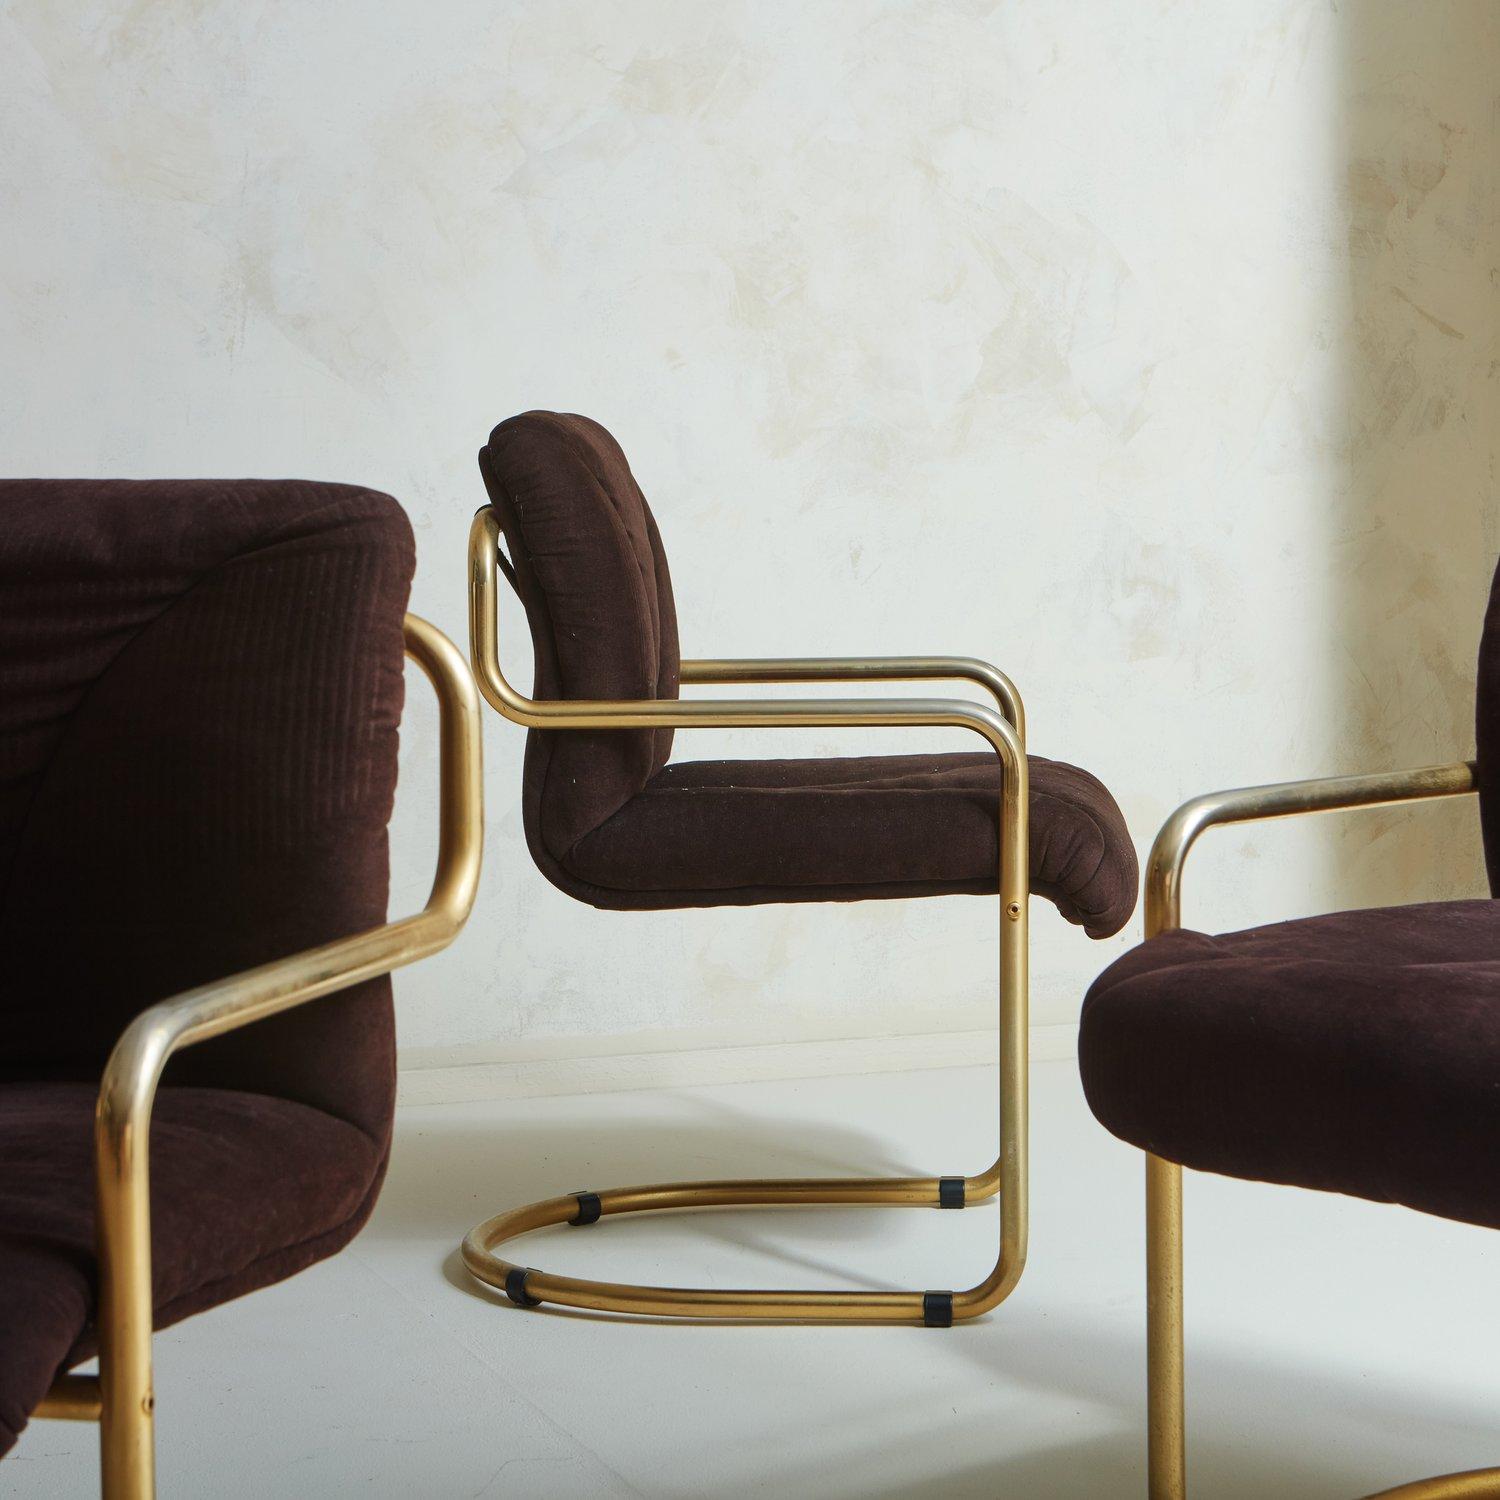 Set of 6 Brass + Brown Cantilevered Dining Chairs with Leather Straps, France 1